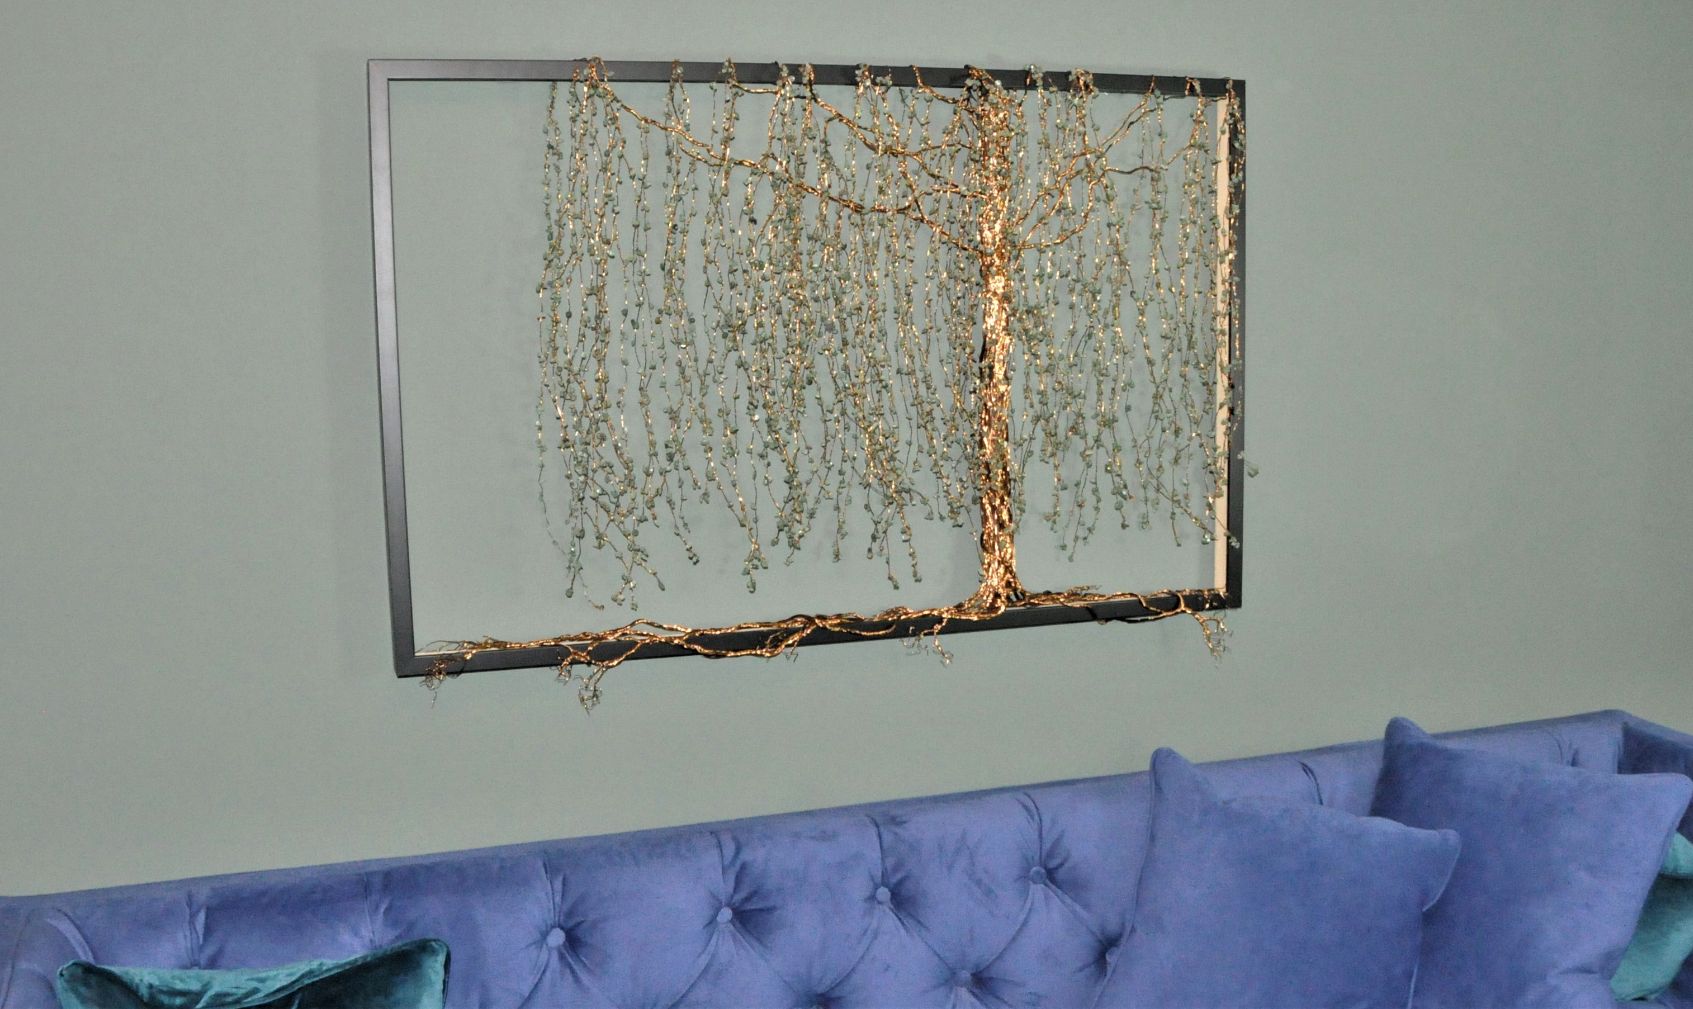 Willow Tree Metal Sculpture in a black frame